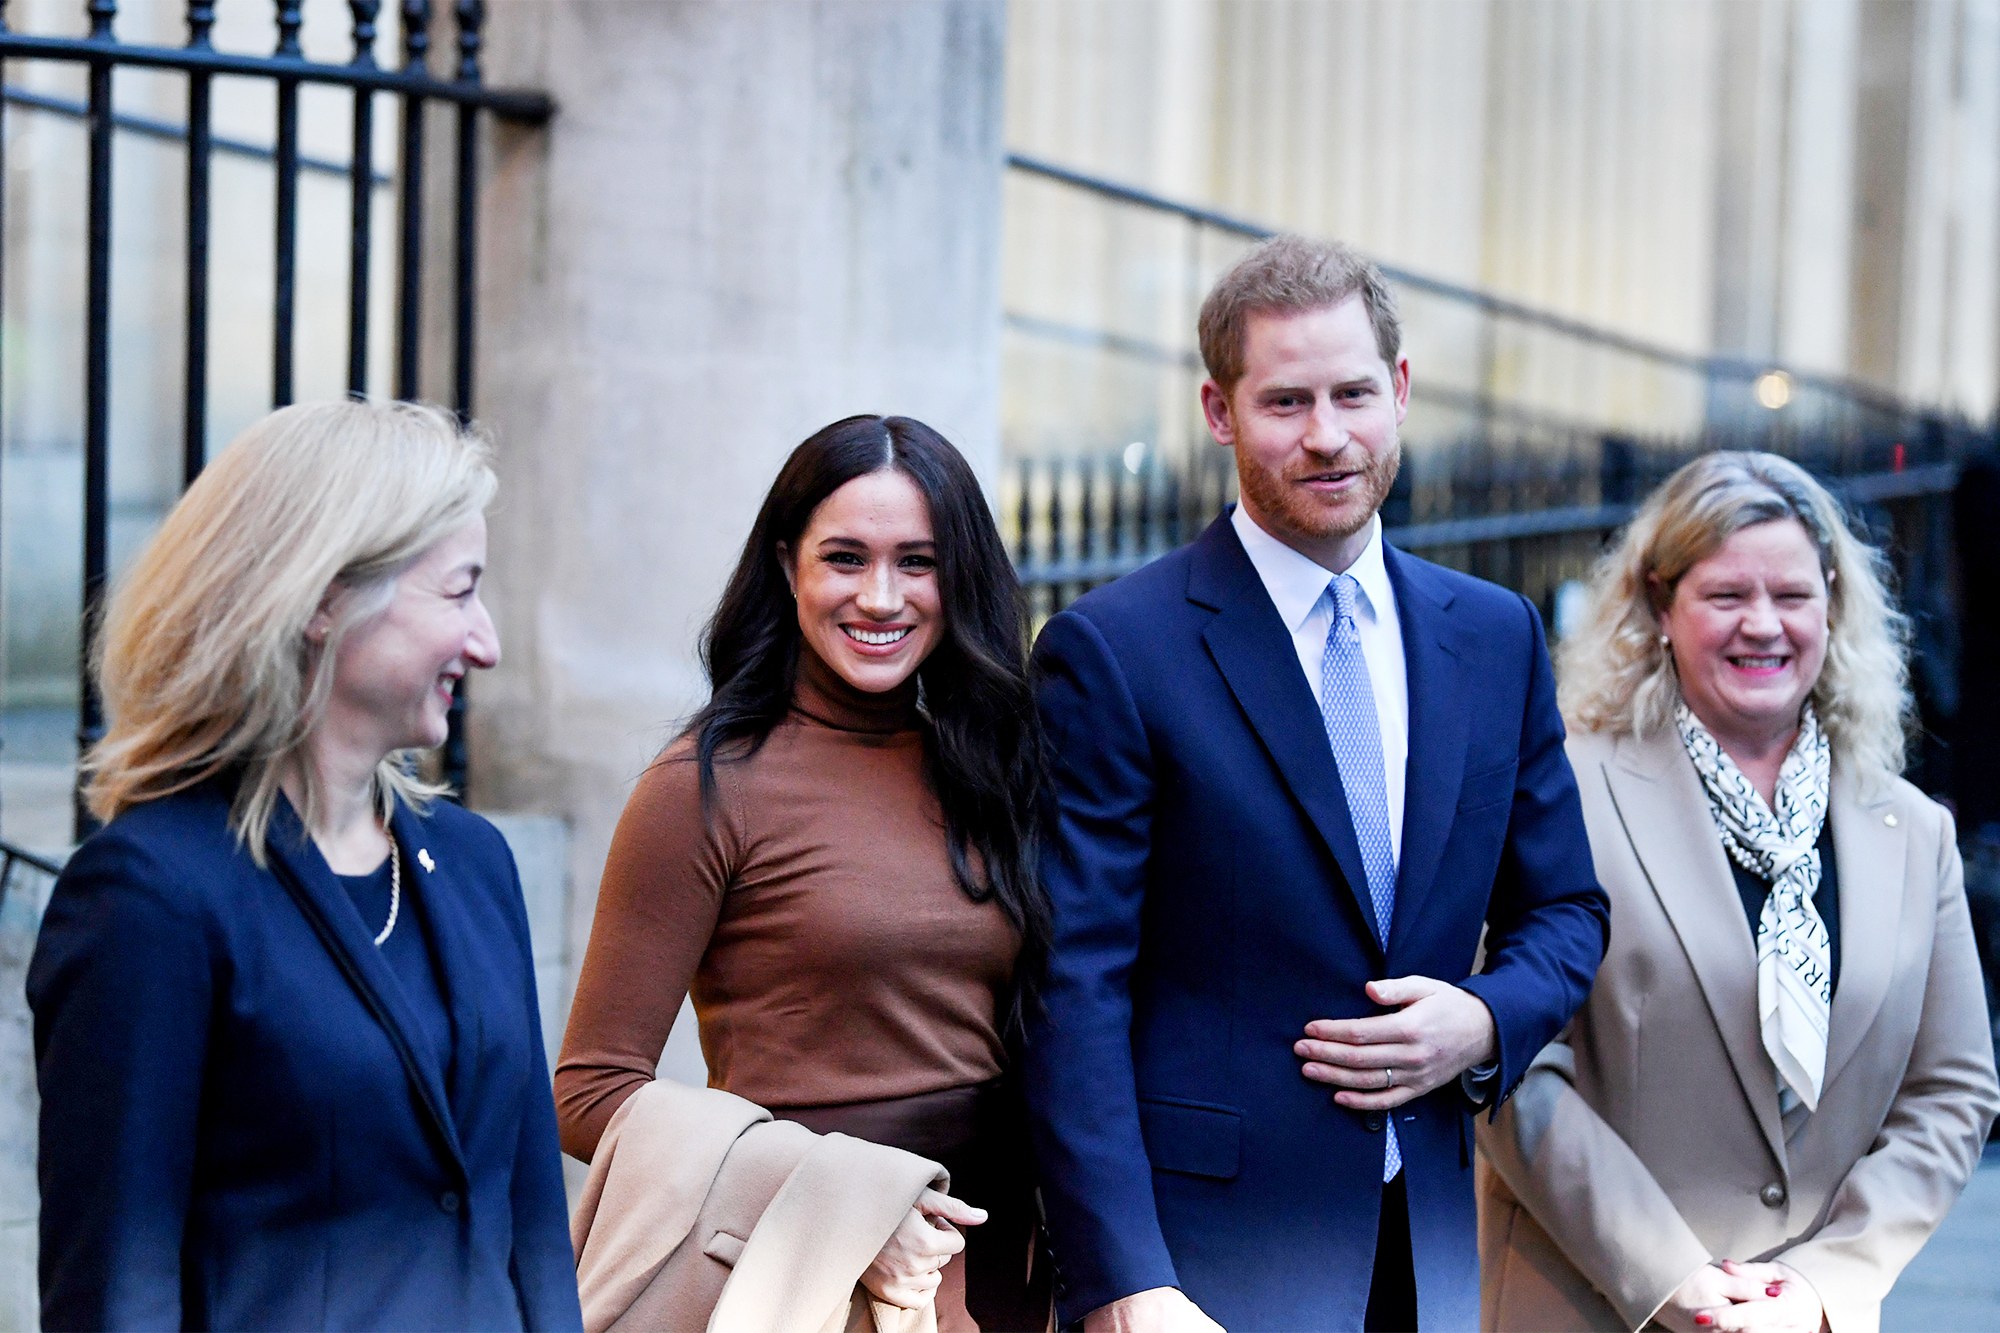 Express Entry could be an immigration option for Harry and Meghan if the latter were the principal applicant